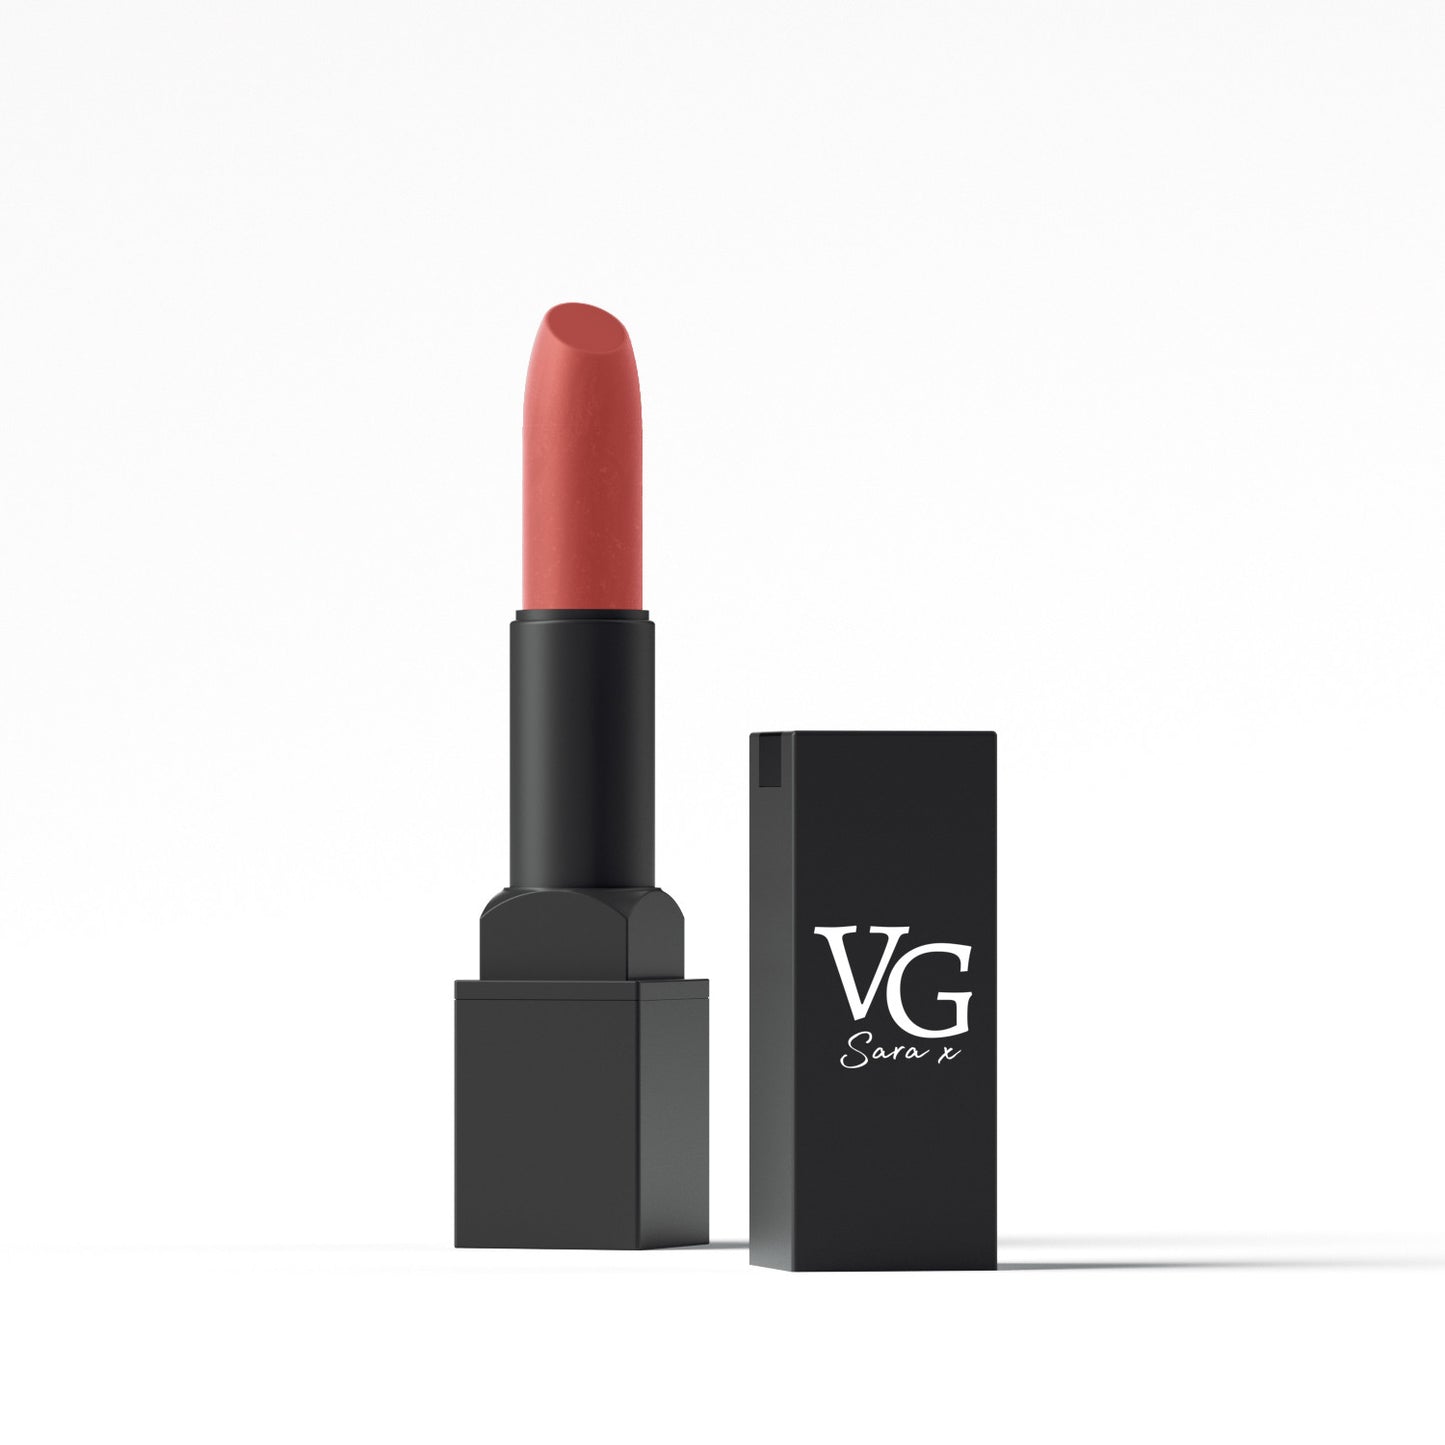 Detailed view of VG long lasting lipstick's texture and color